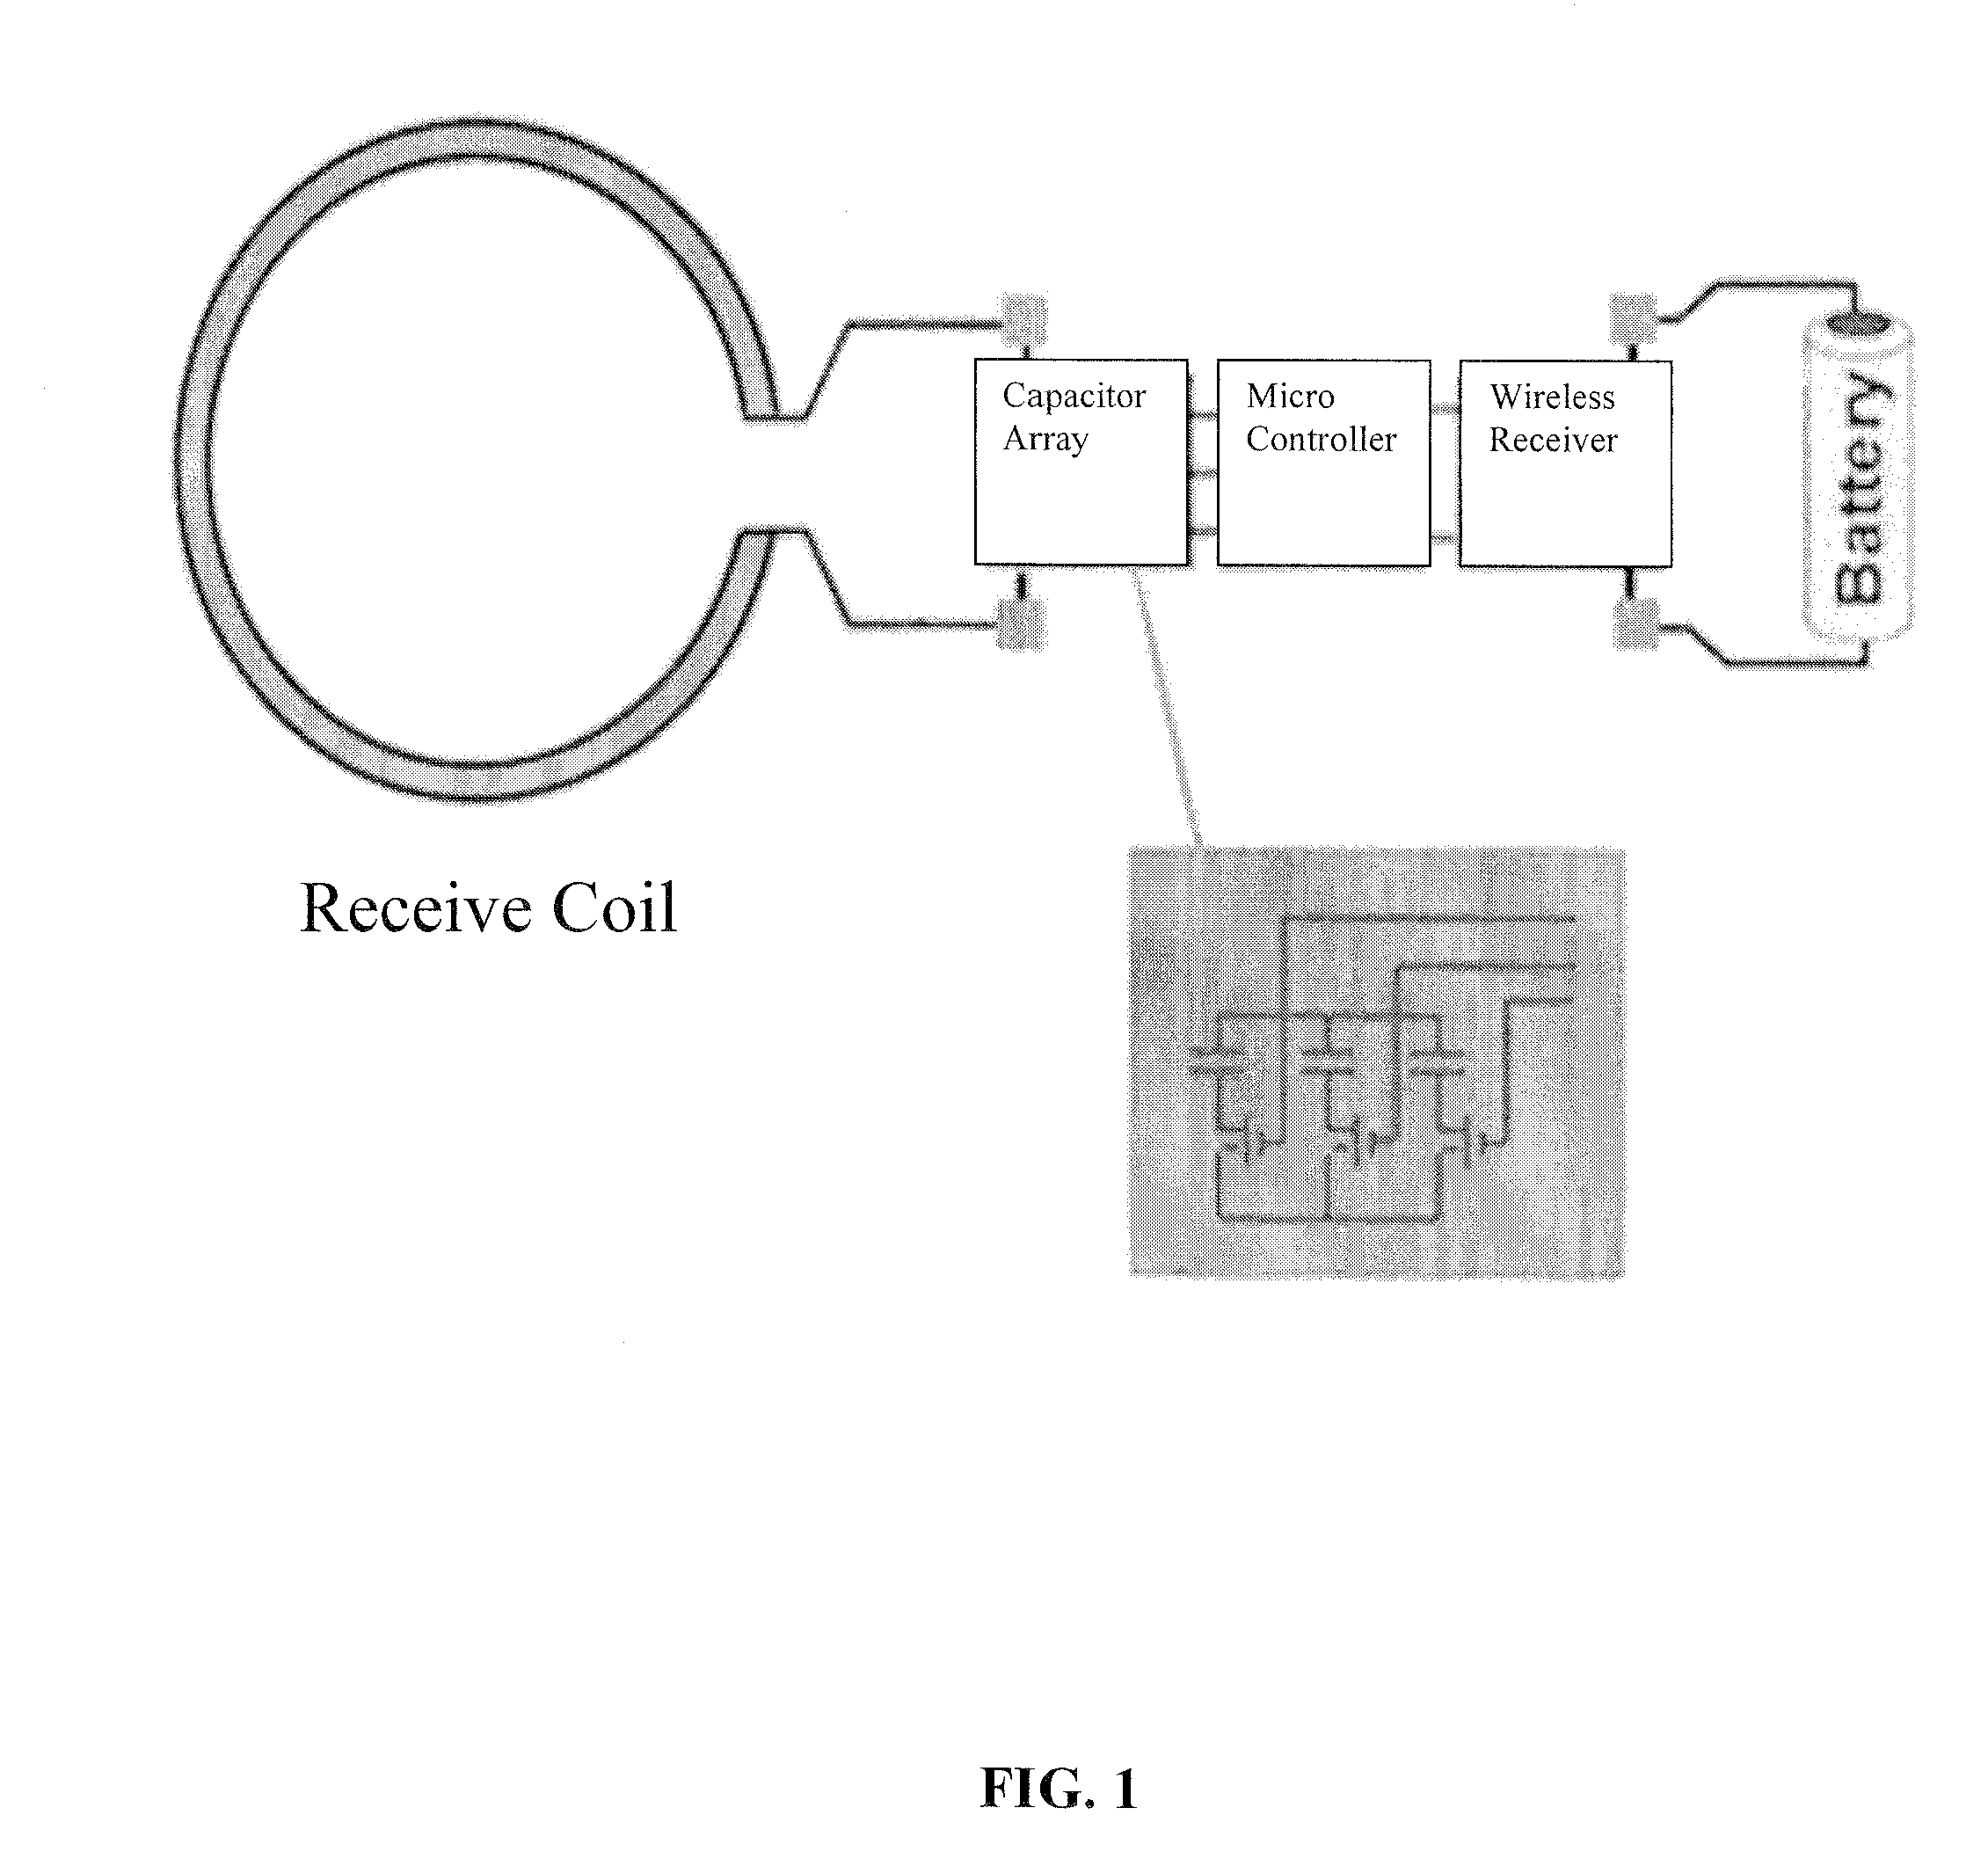 Method and Apparatus for Providing a Wireless Multiple-Frequency MR Coil